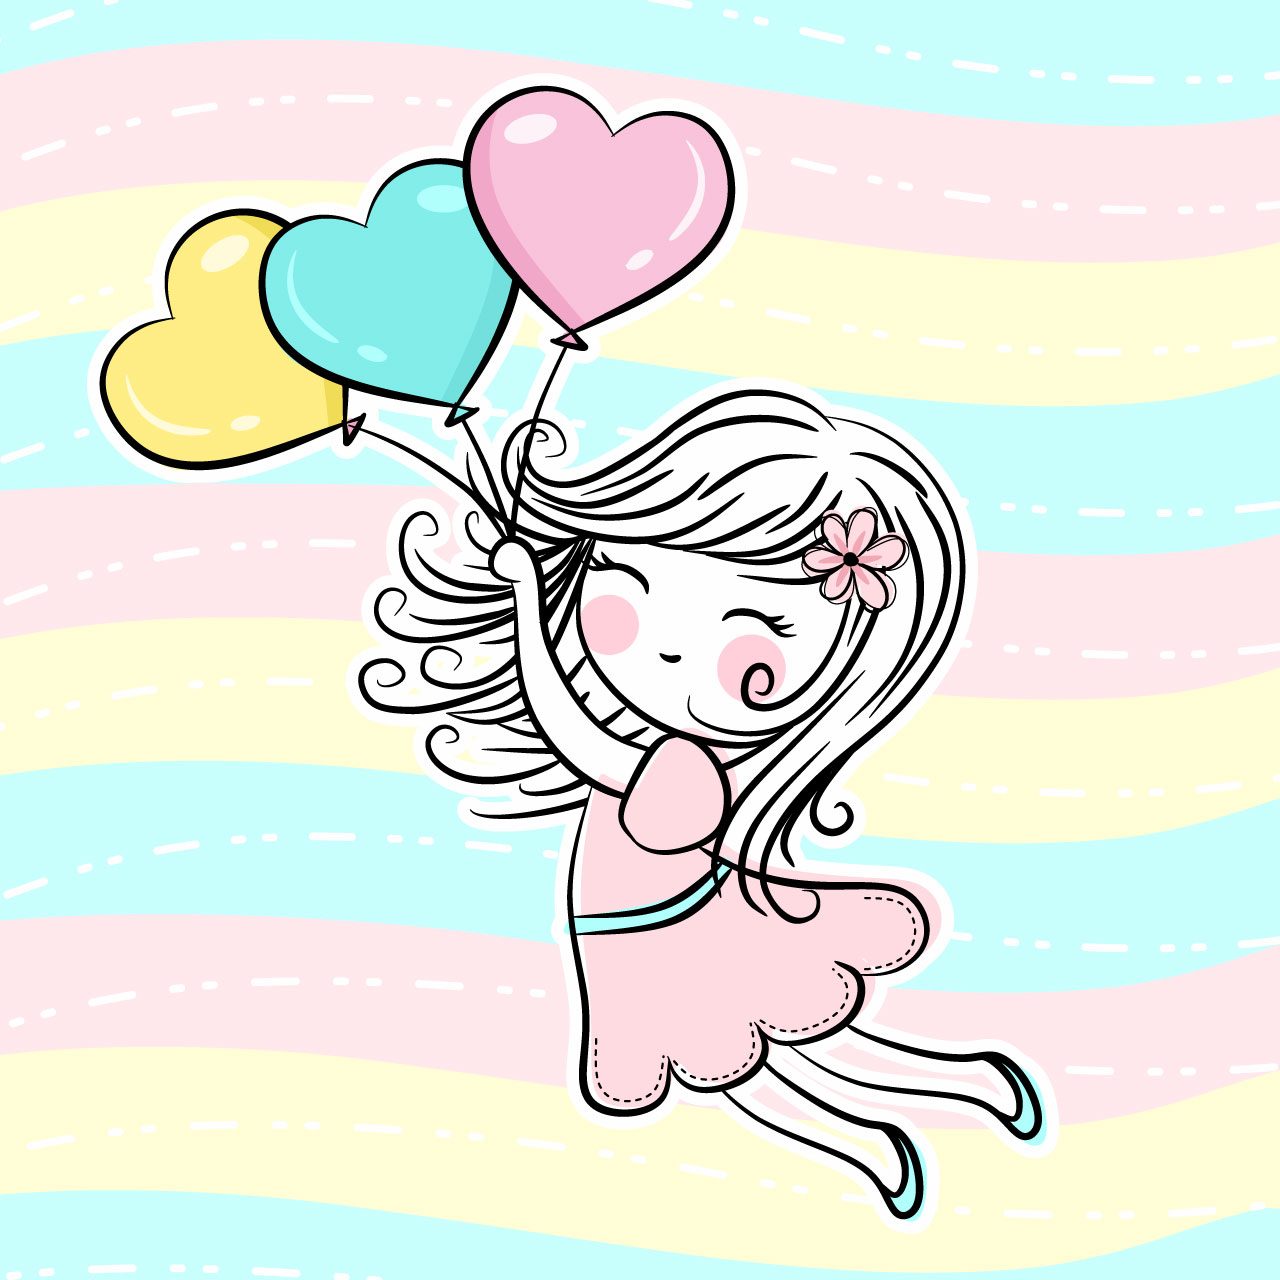 Girl flying with heart balloons cartoon illustration image hand drawing sketch